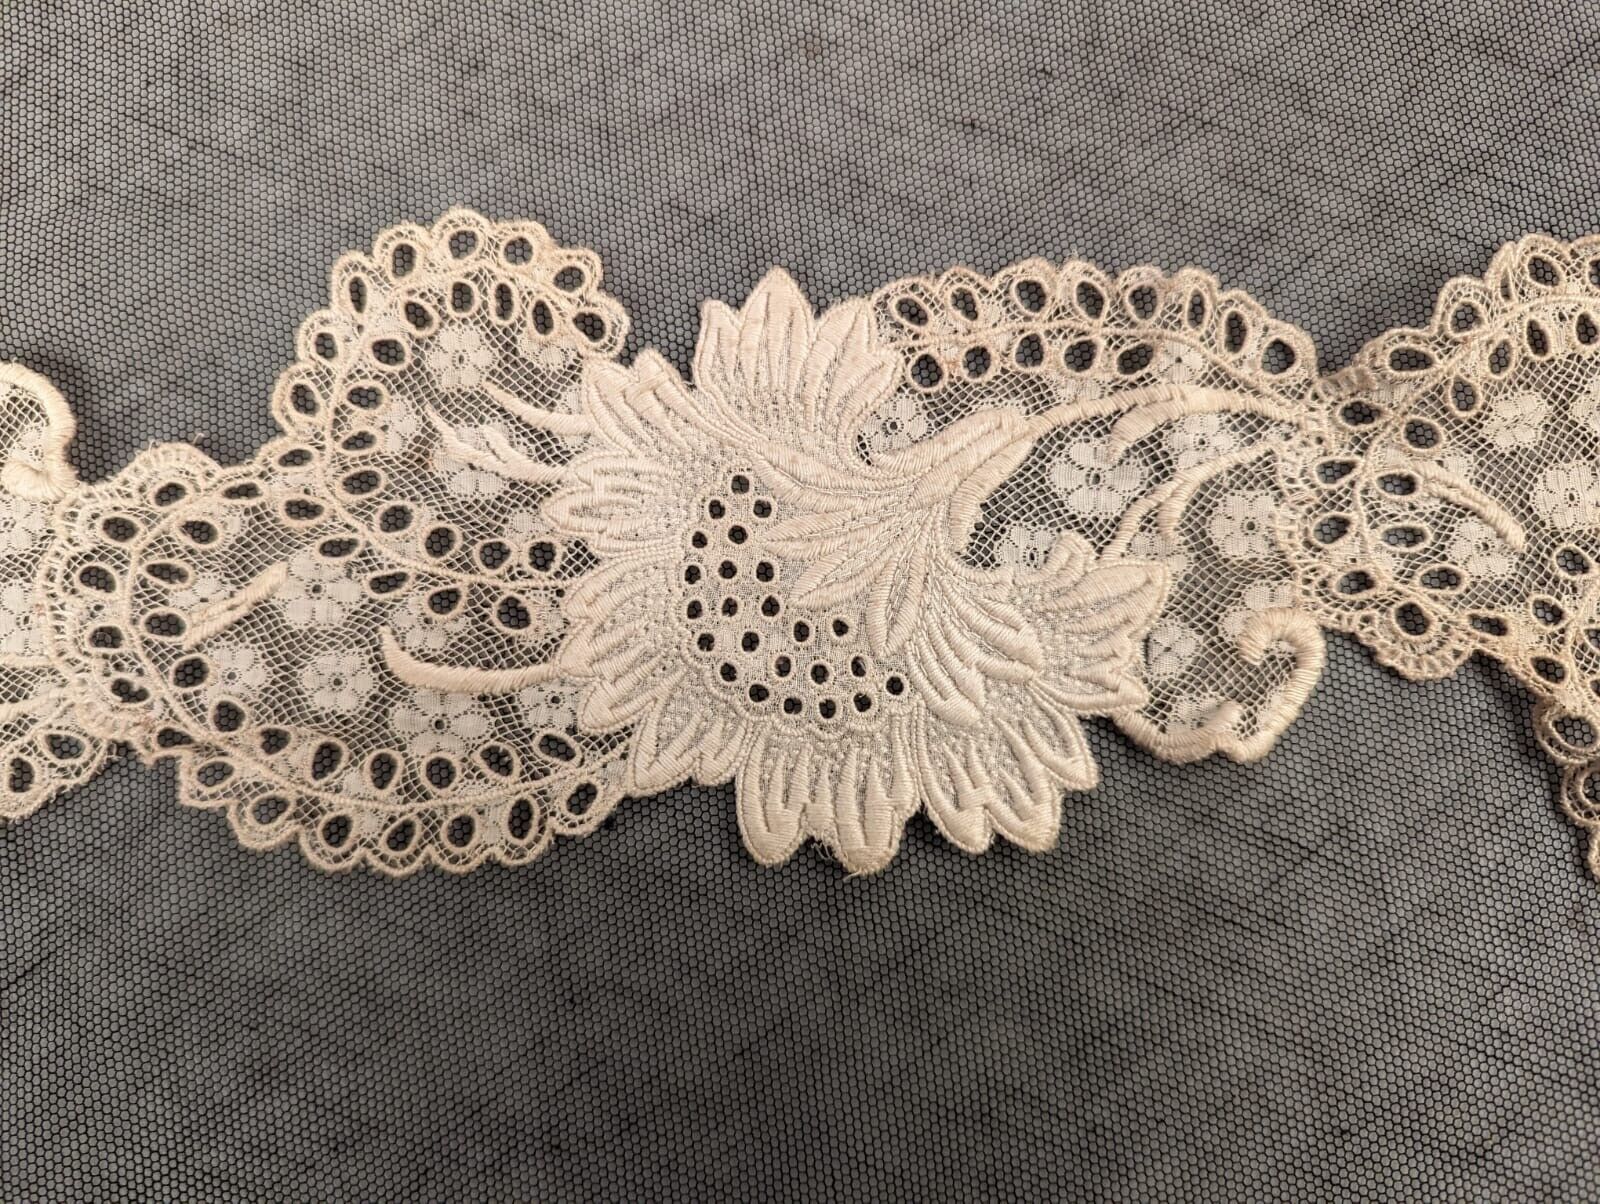 EXQUISITE ANTIQUE VICTORIAN EMBROIDERED LACE FRAGMENT FOR DRESS TRIM